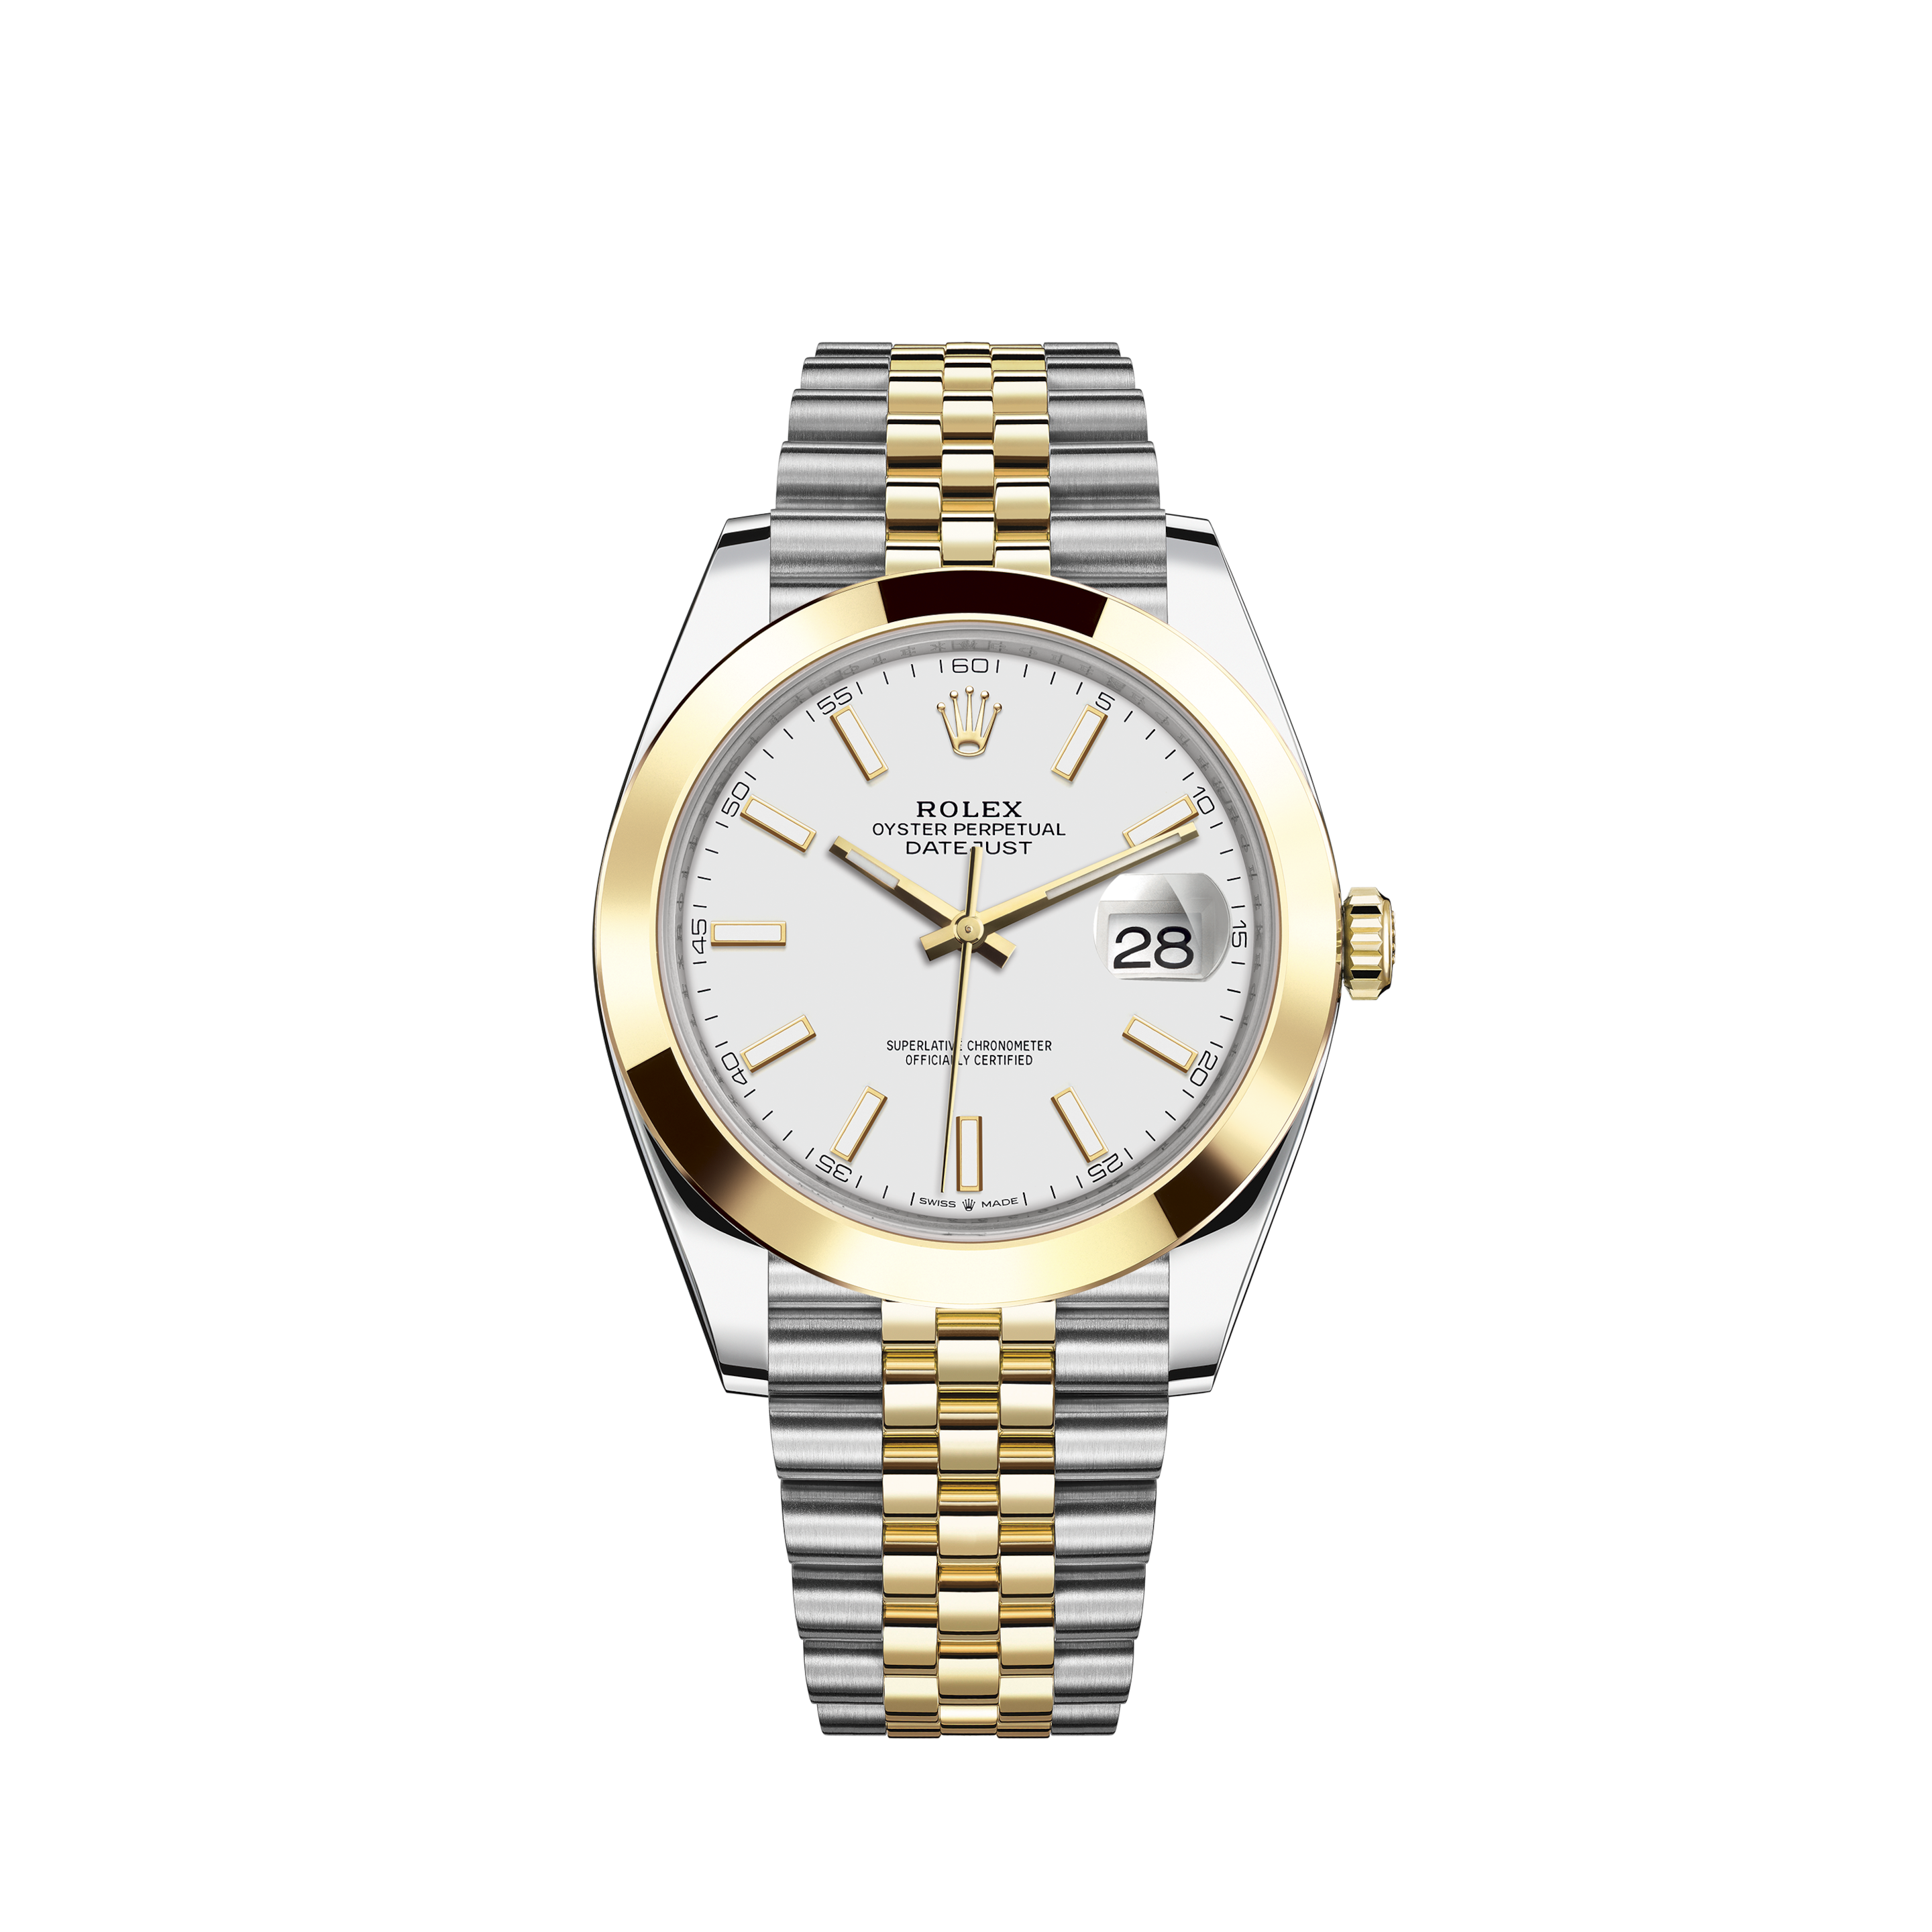 Rolex Datejust 36 Stainless Steel Yellow Gold 126233 Silver R DIA Jubile